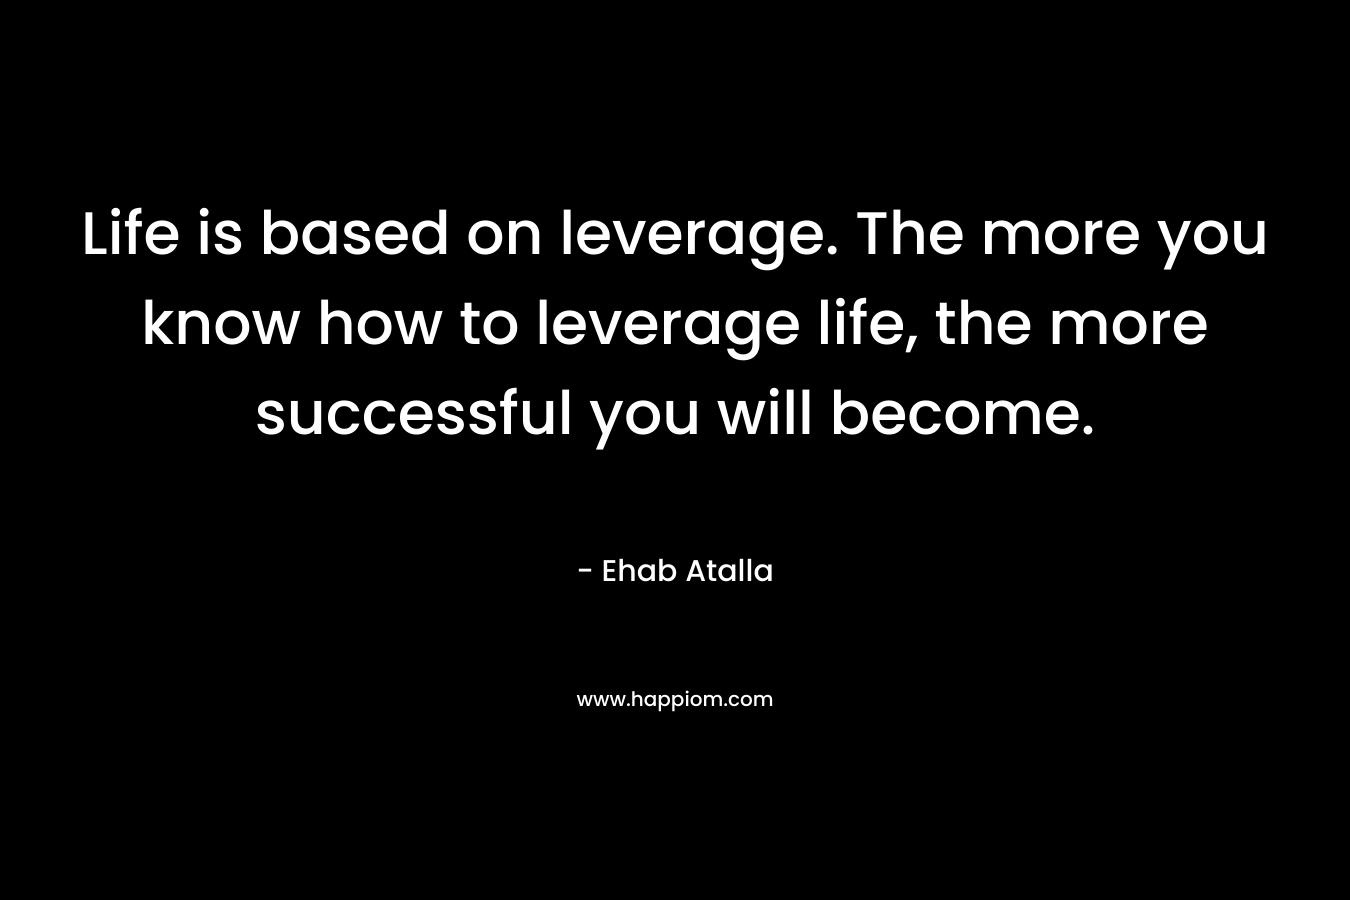 Life is based on leverage. The more you know how to leverage life, the more successful you will become. – Ehab Atalla